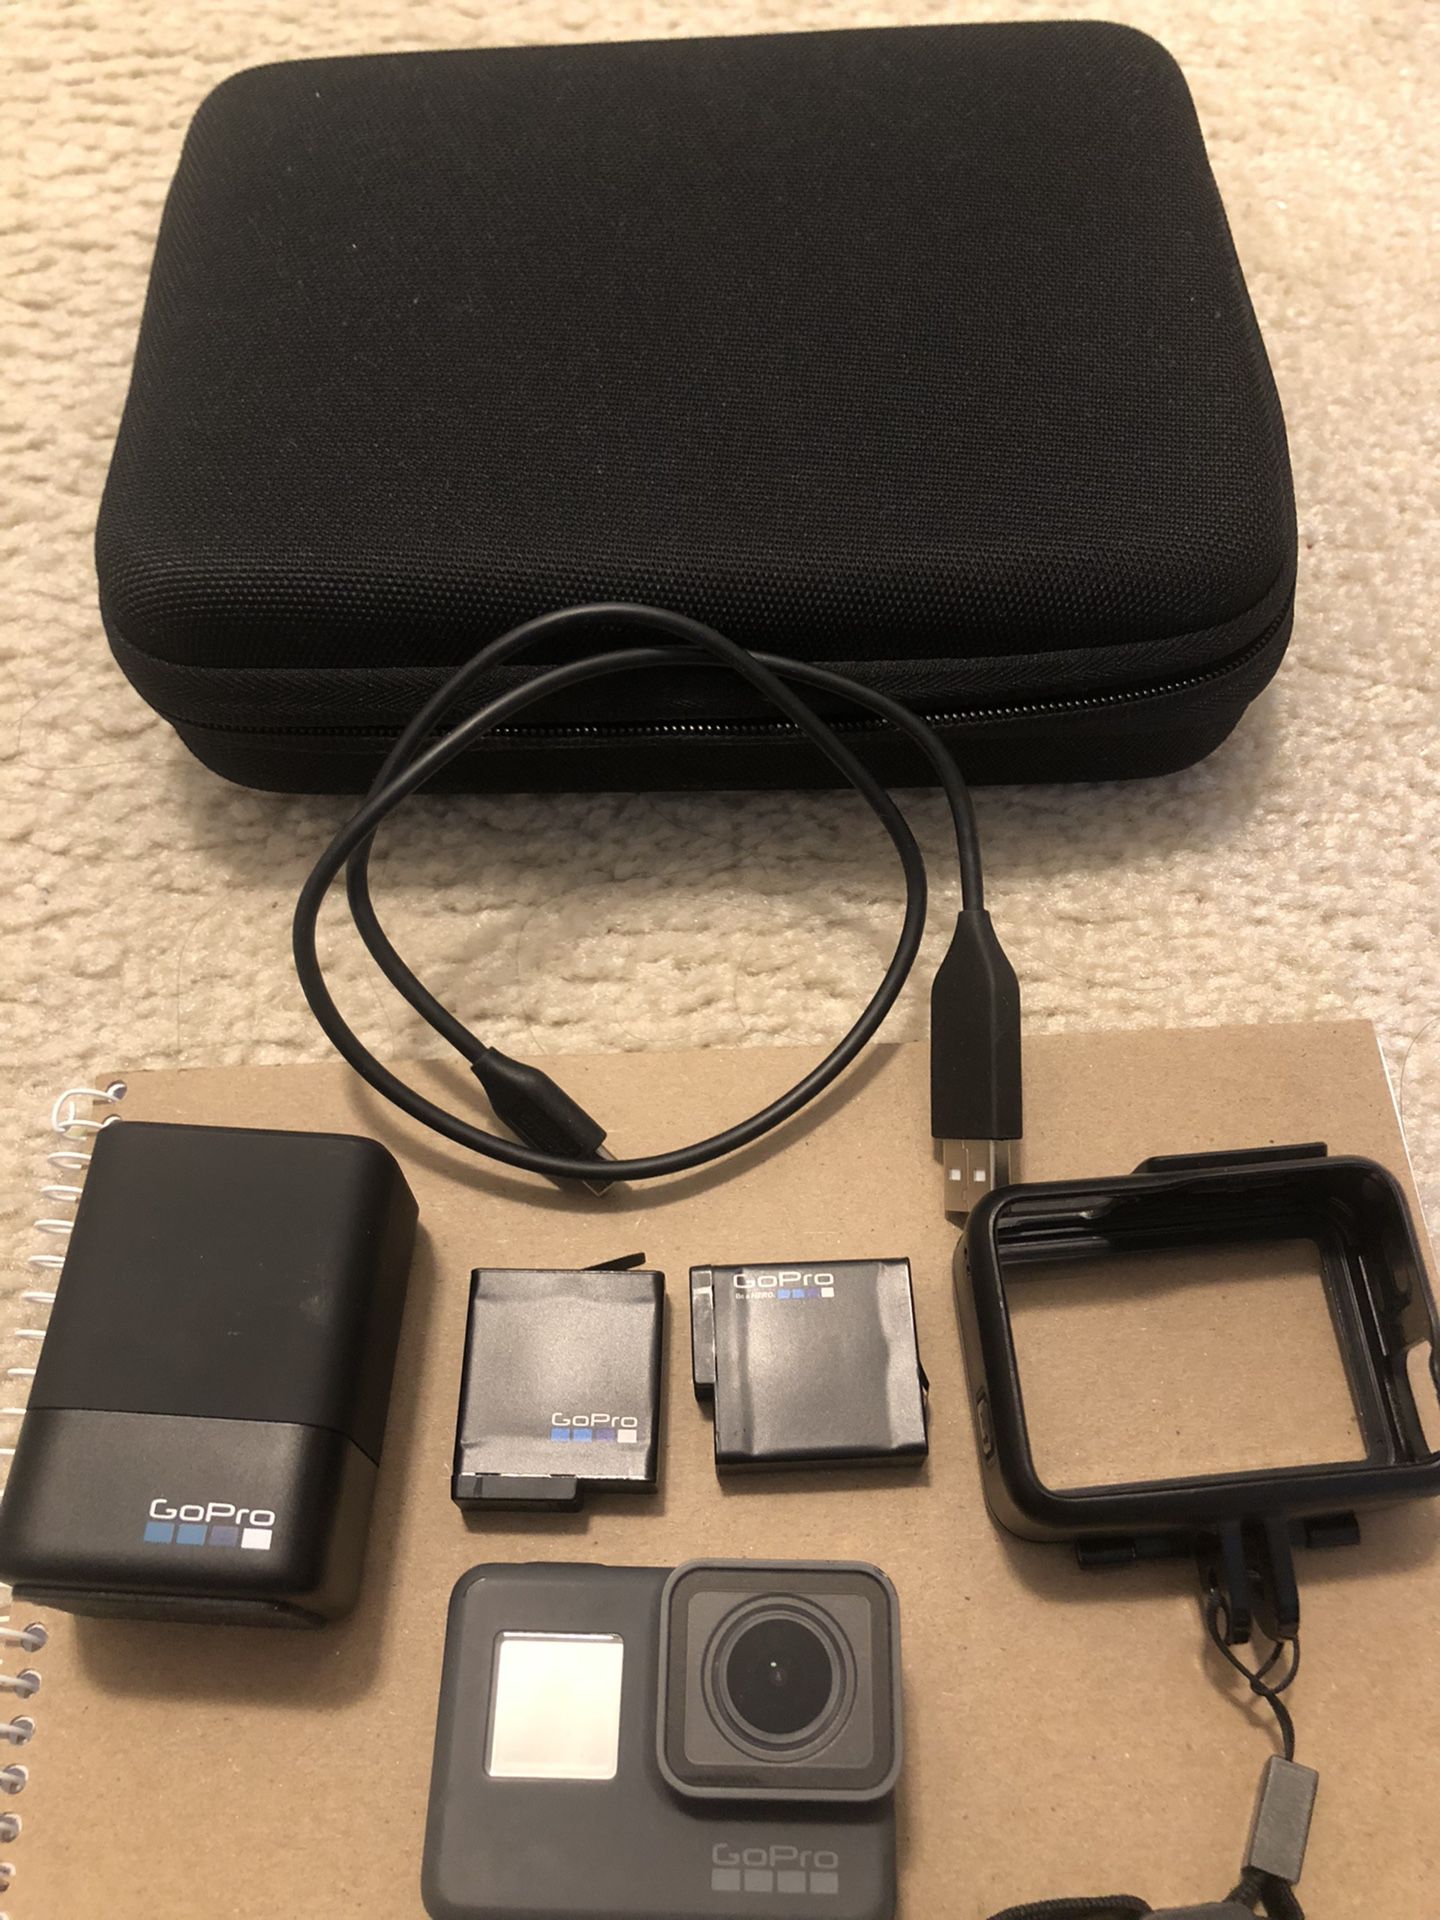 99% NEW GoPro HERO 5 Black Rarely Used Great Gift